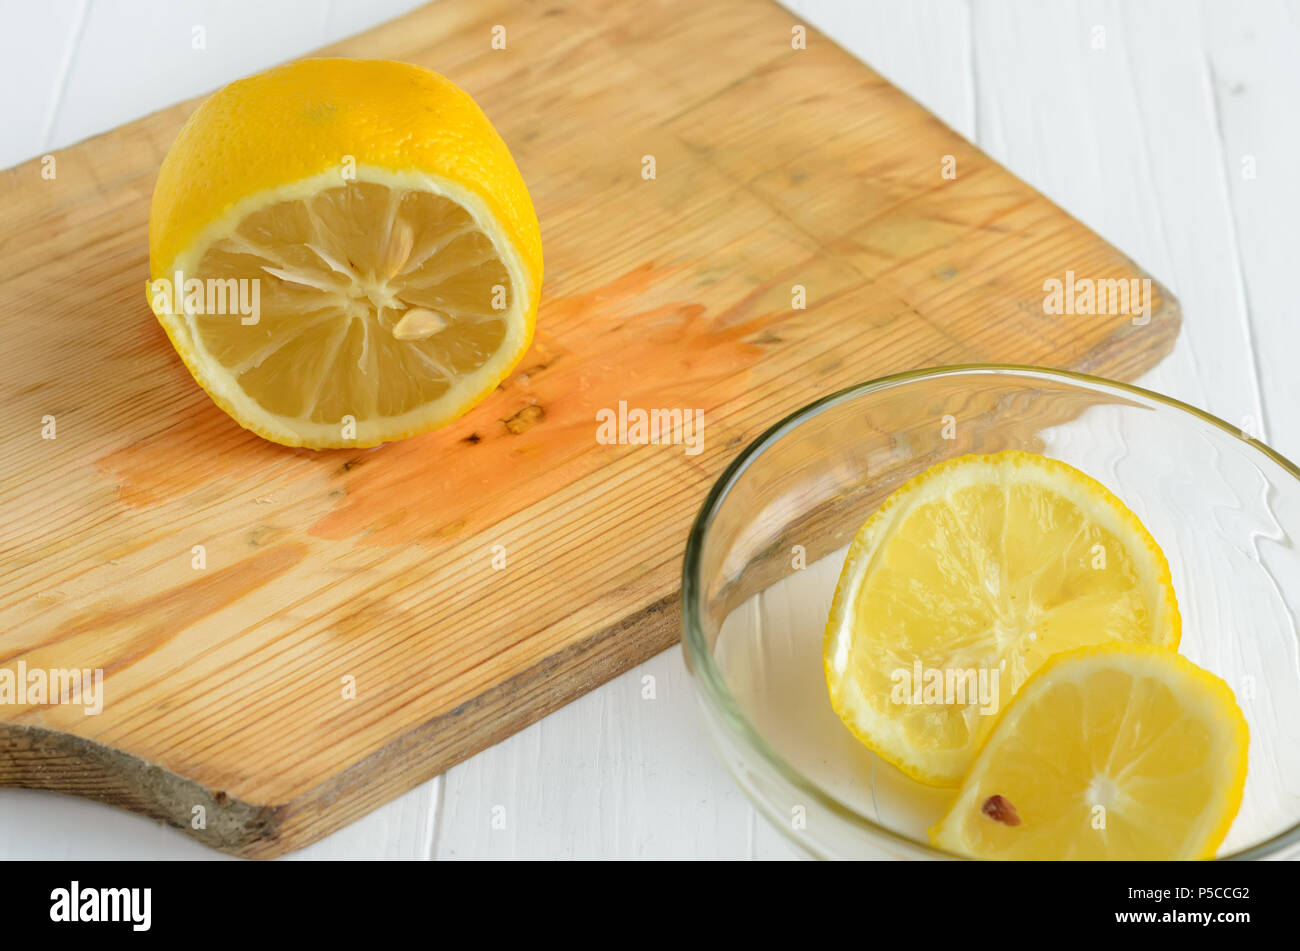 One cutted lemon on a chopping board.Two sliced of lemon into glass plate are down right angle. Stock Photo